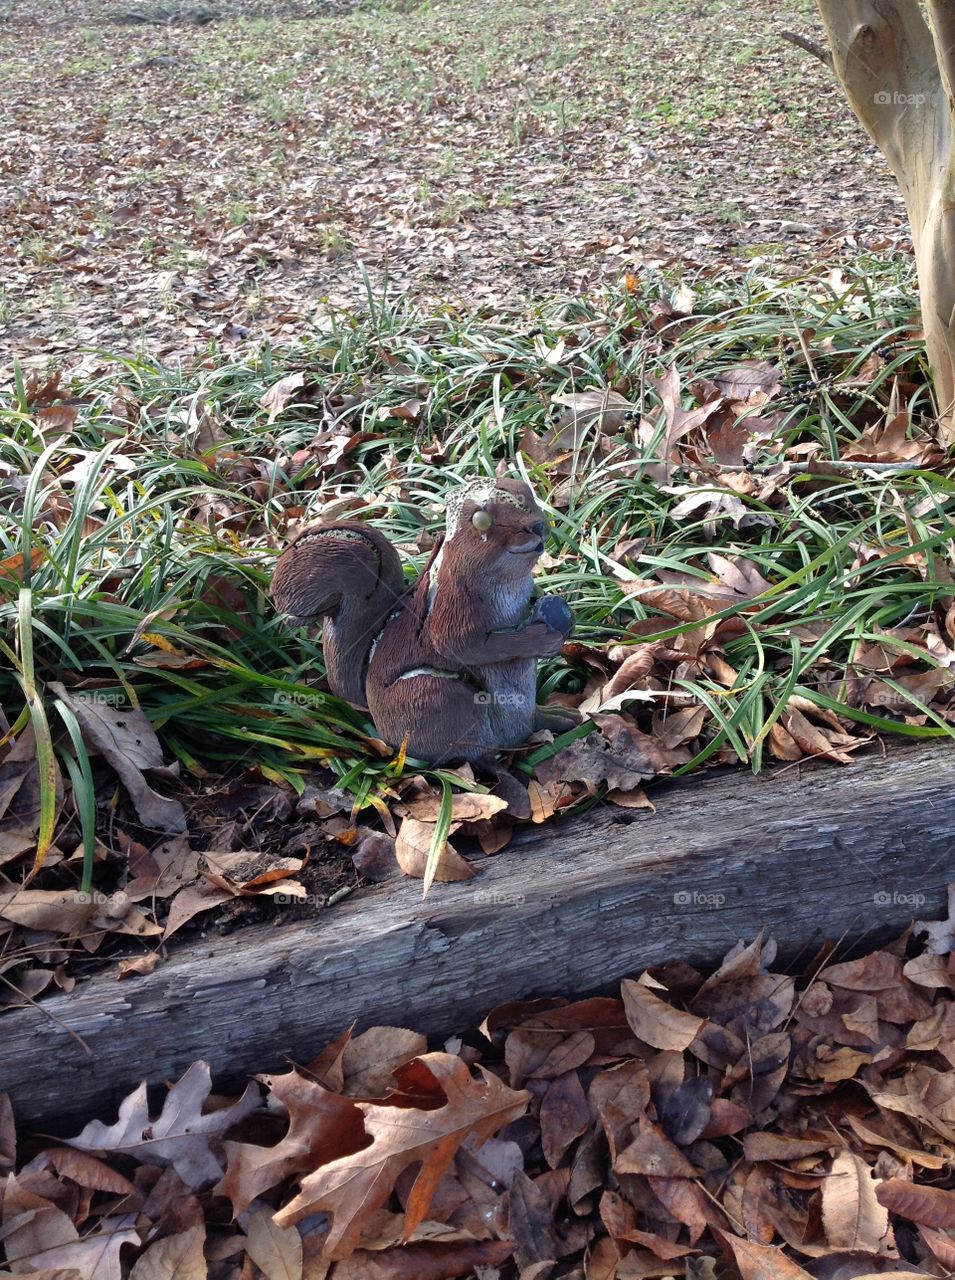 Squirrel Statue in the Yard